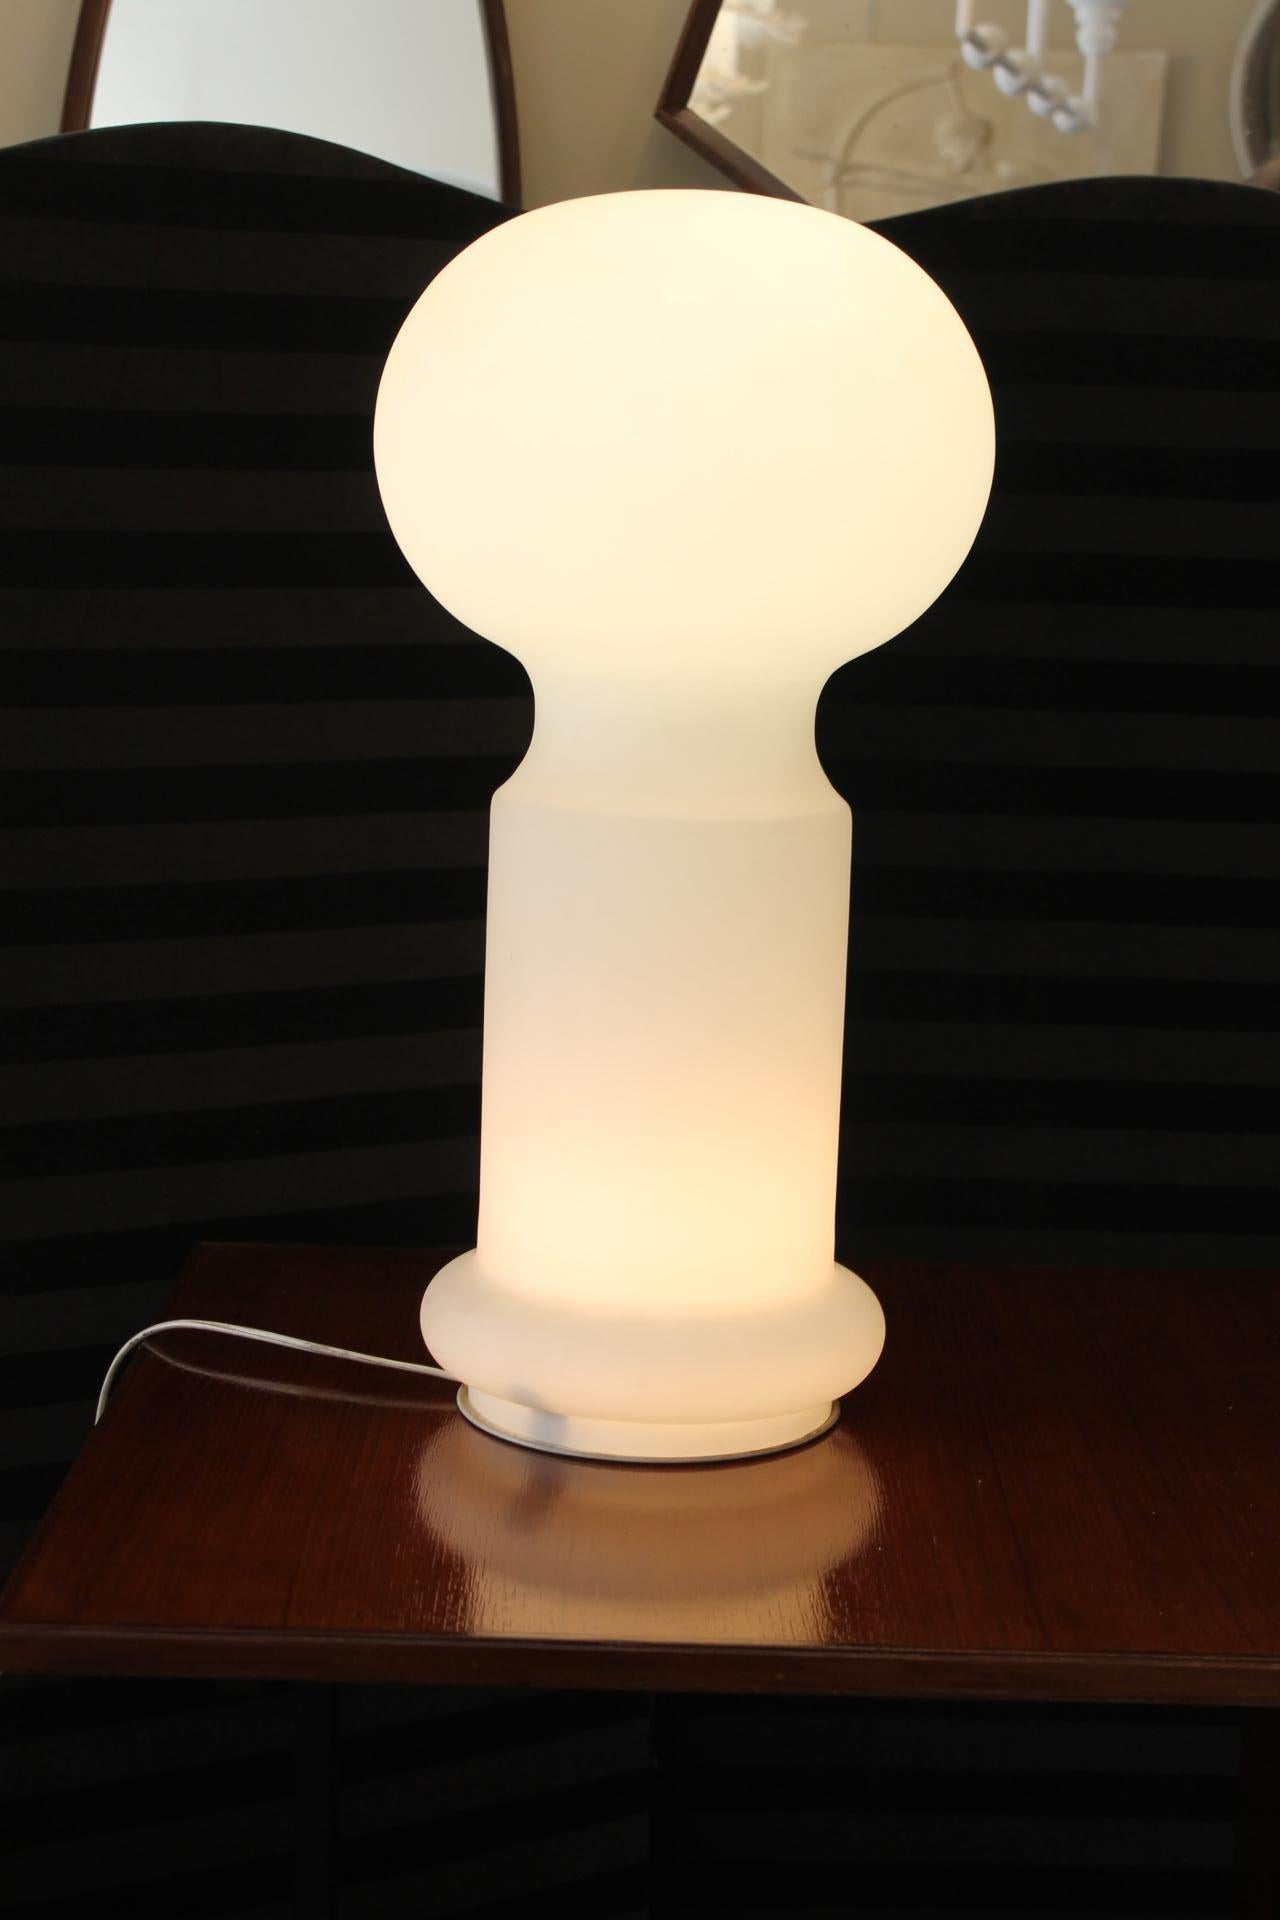 Murano lamp, by Carlo Nason, in matte white opaline, made in 1960. Classic and Sober.
Carlo Nason is a well-known artist in the Italian design of the 60s/70s.